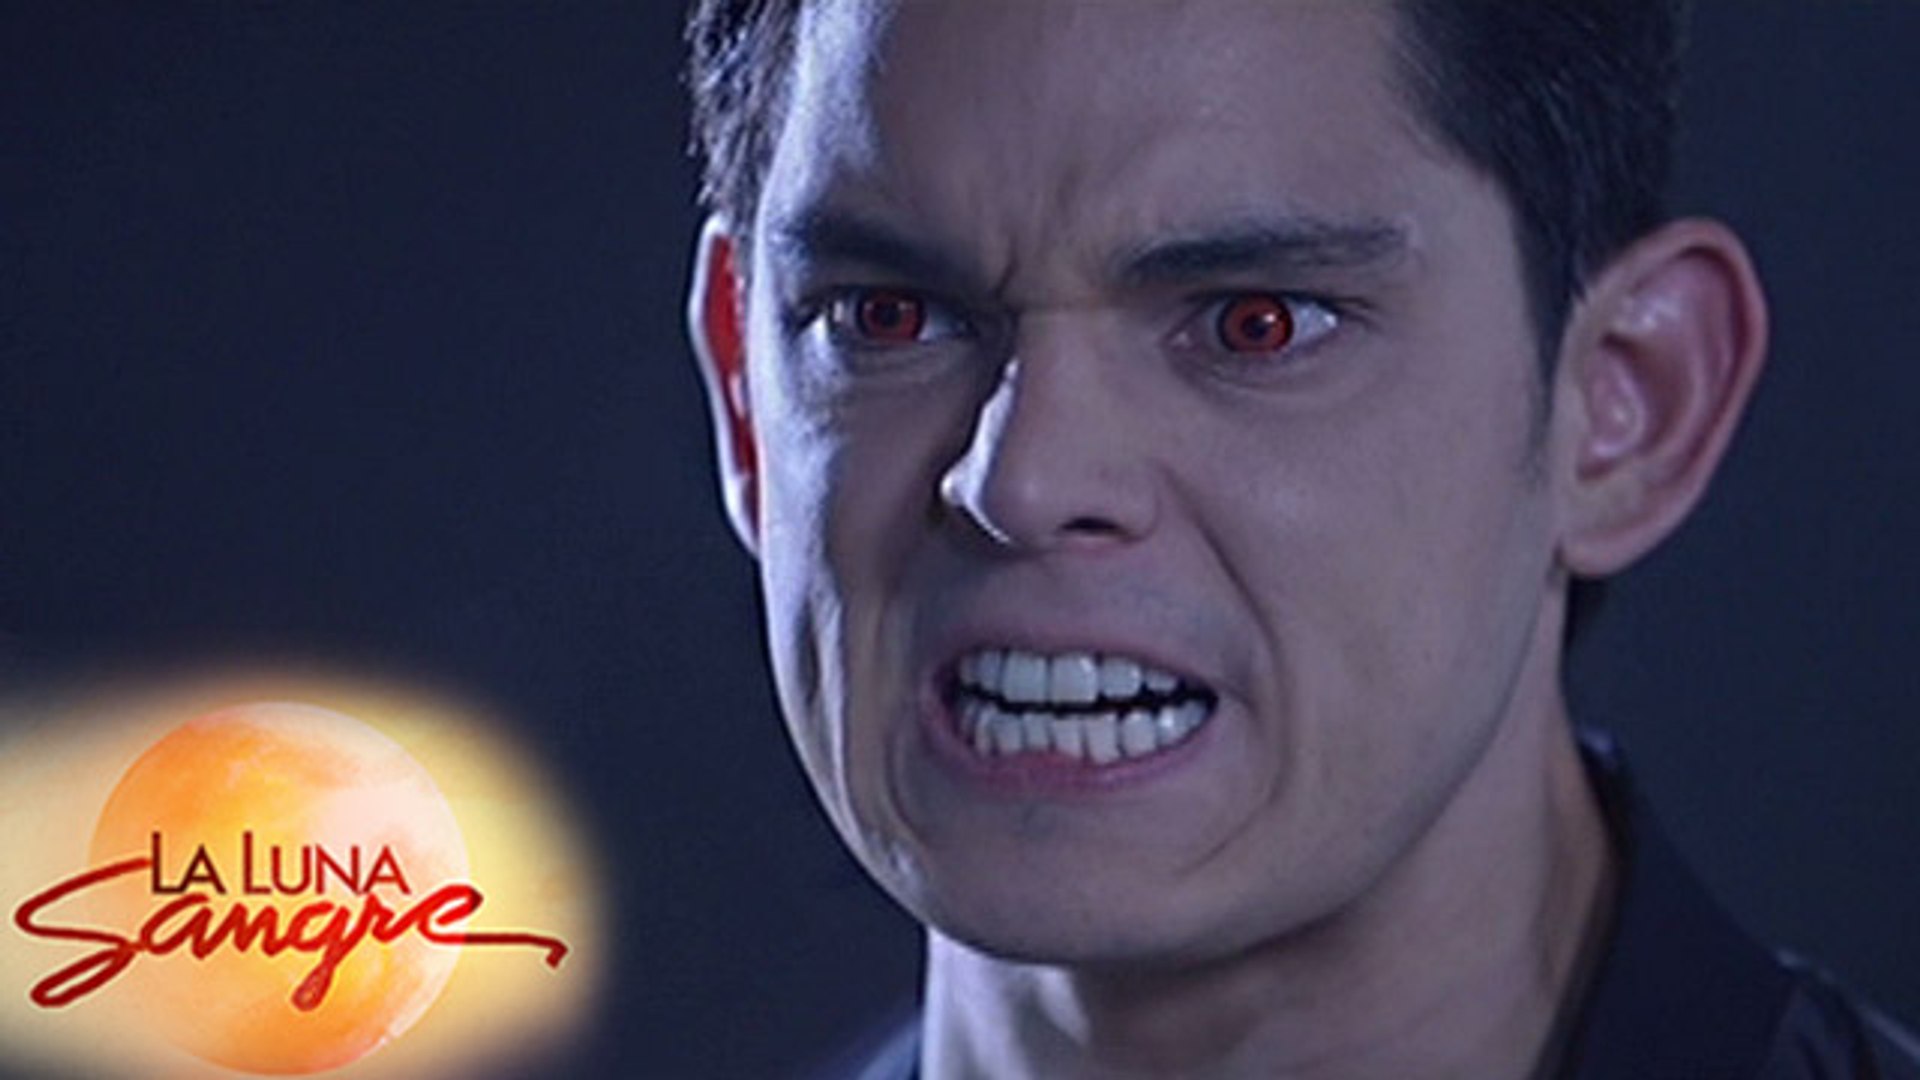 La Luna Sangre Sandrino Learns About The Lady In White Ep 51 Video Dailymotion